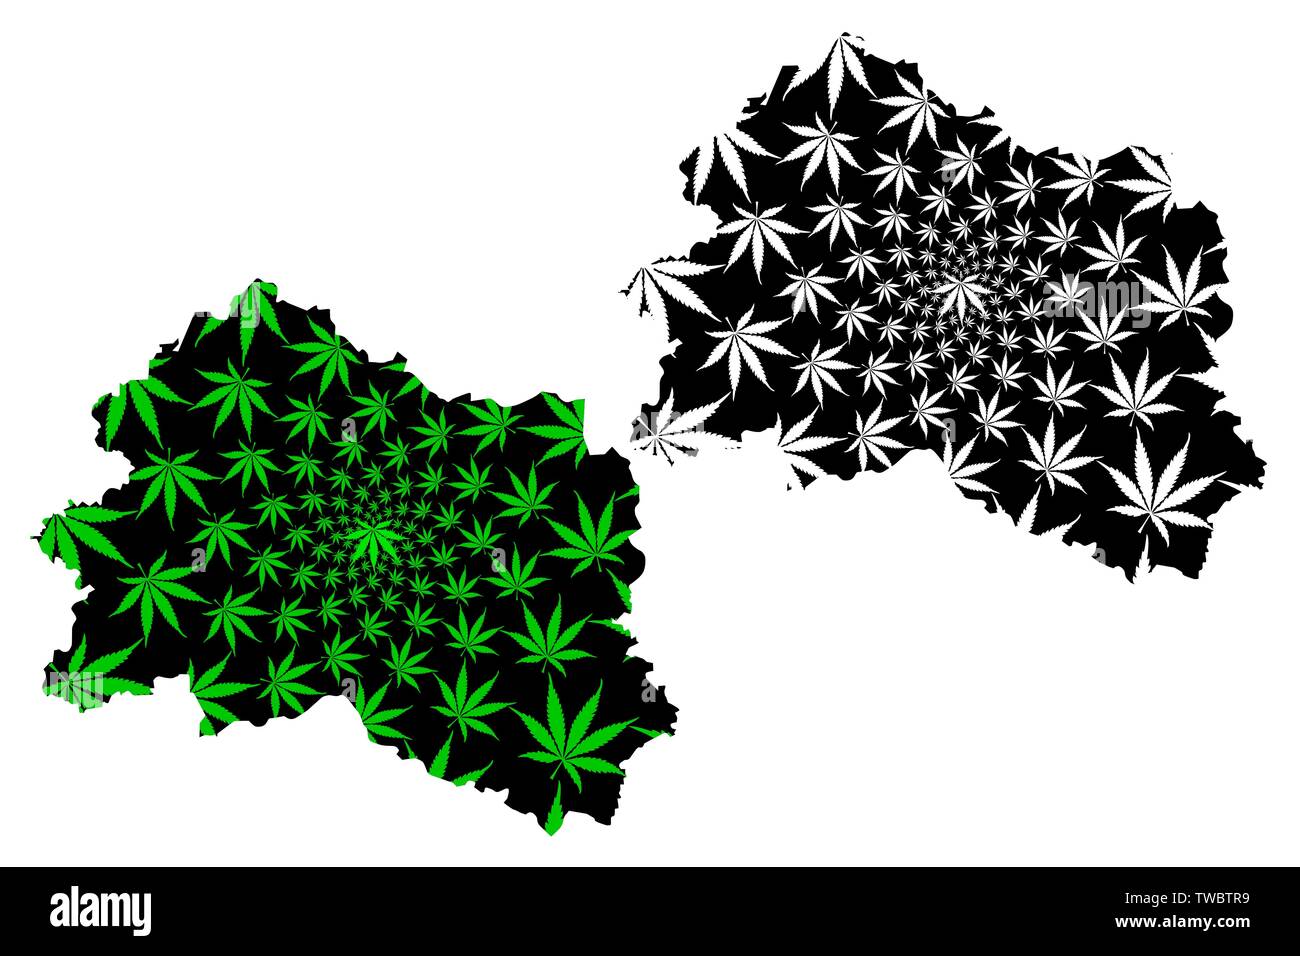 Oryol Oblast (Russia, Subjects of the Russian Federation, Oblasts of Russia) map is designed cannabis leaf green and black, Oryol Oblast map made of m Stock Vector